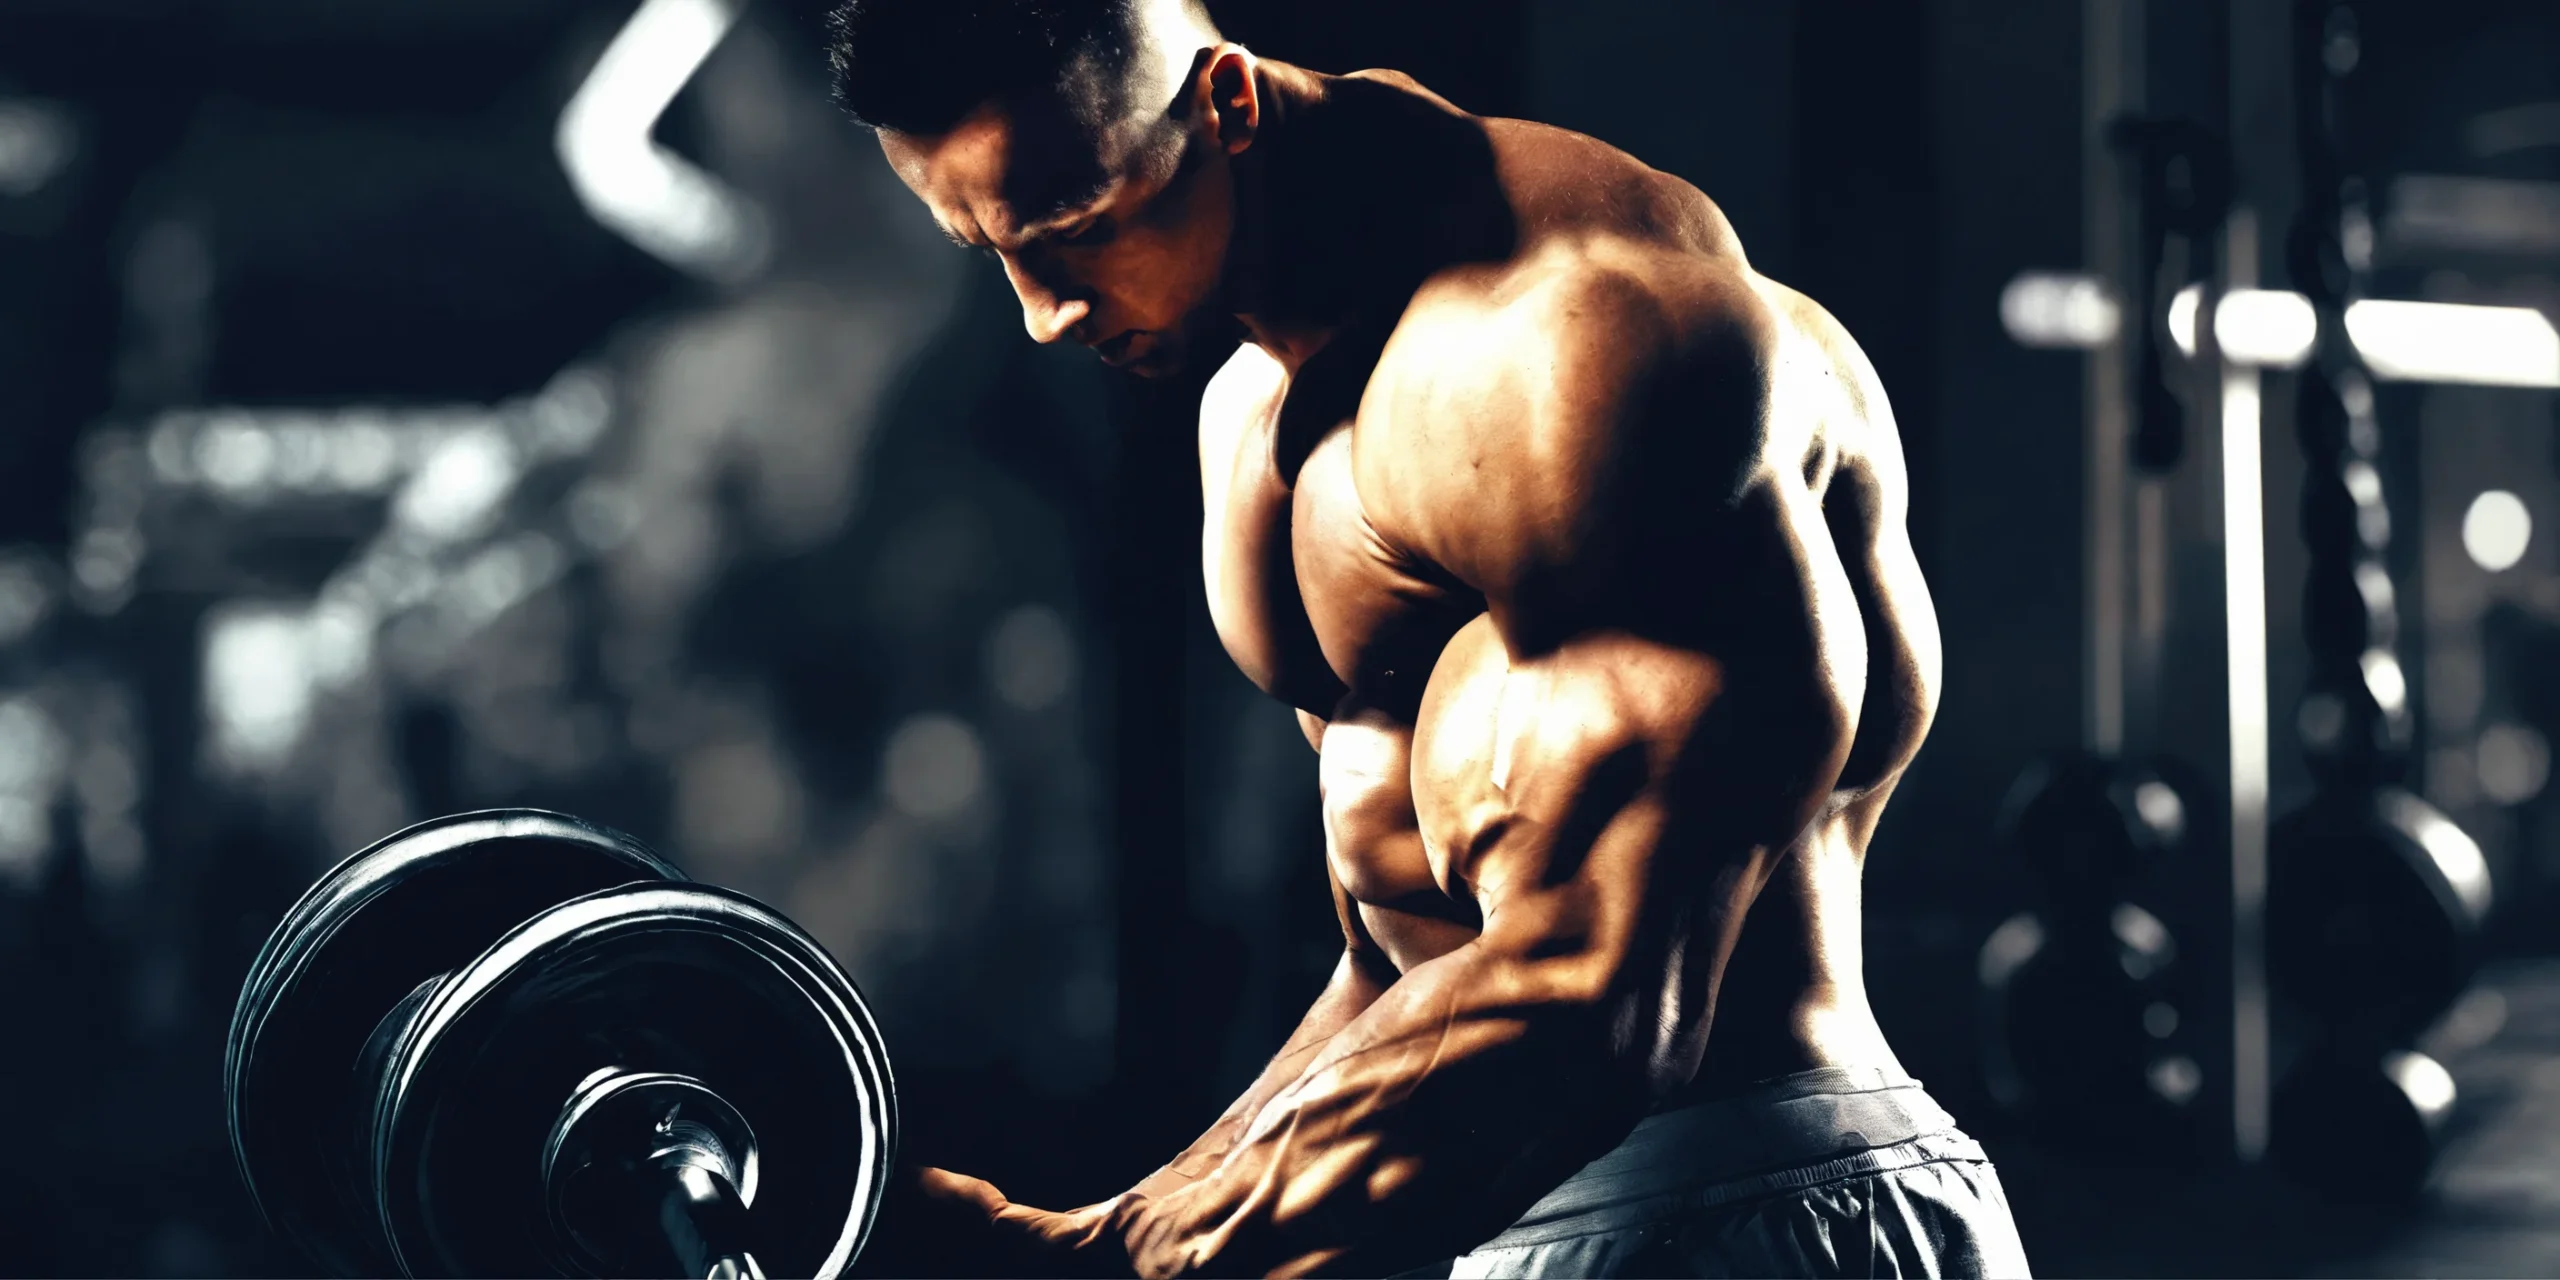 10 Proven Ways to Build Muscle Faster: Tips, Diet, and Workout Strategies